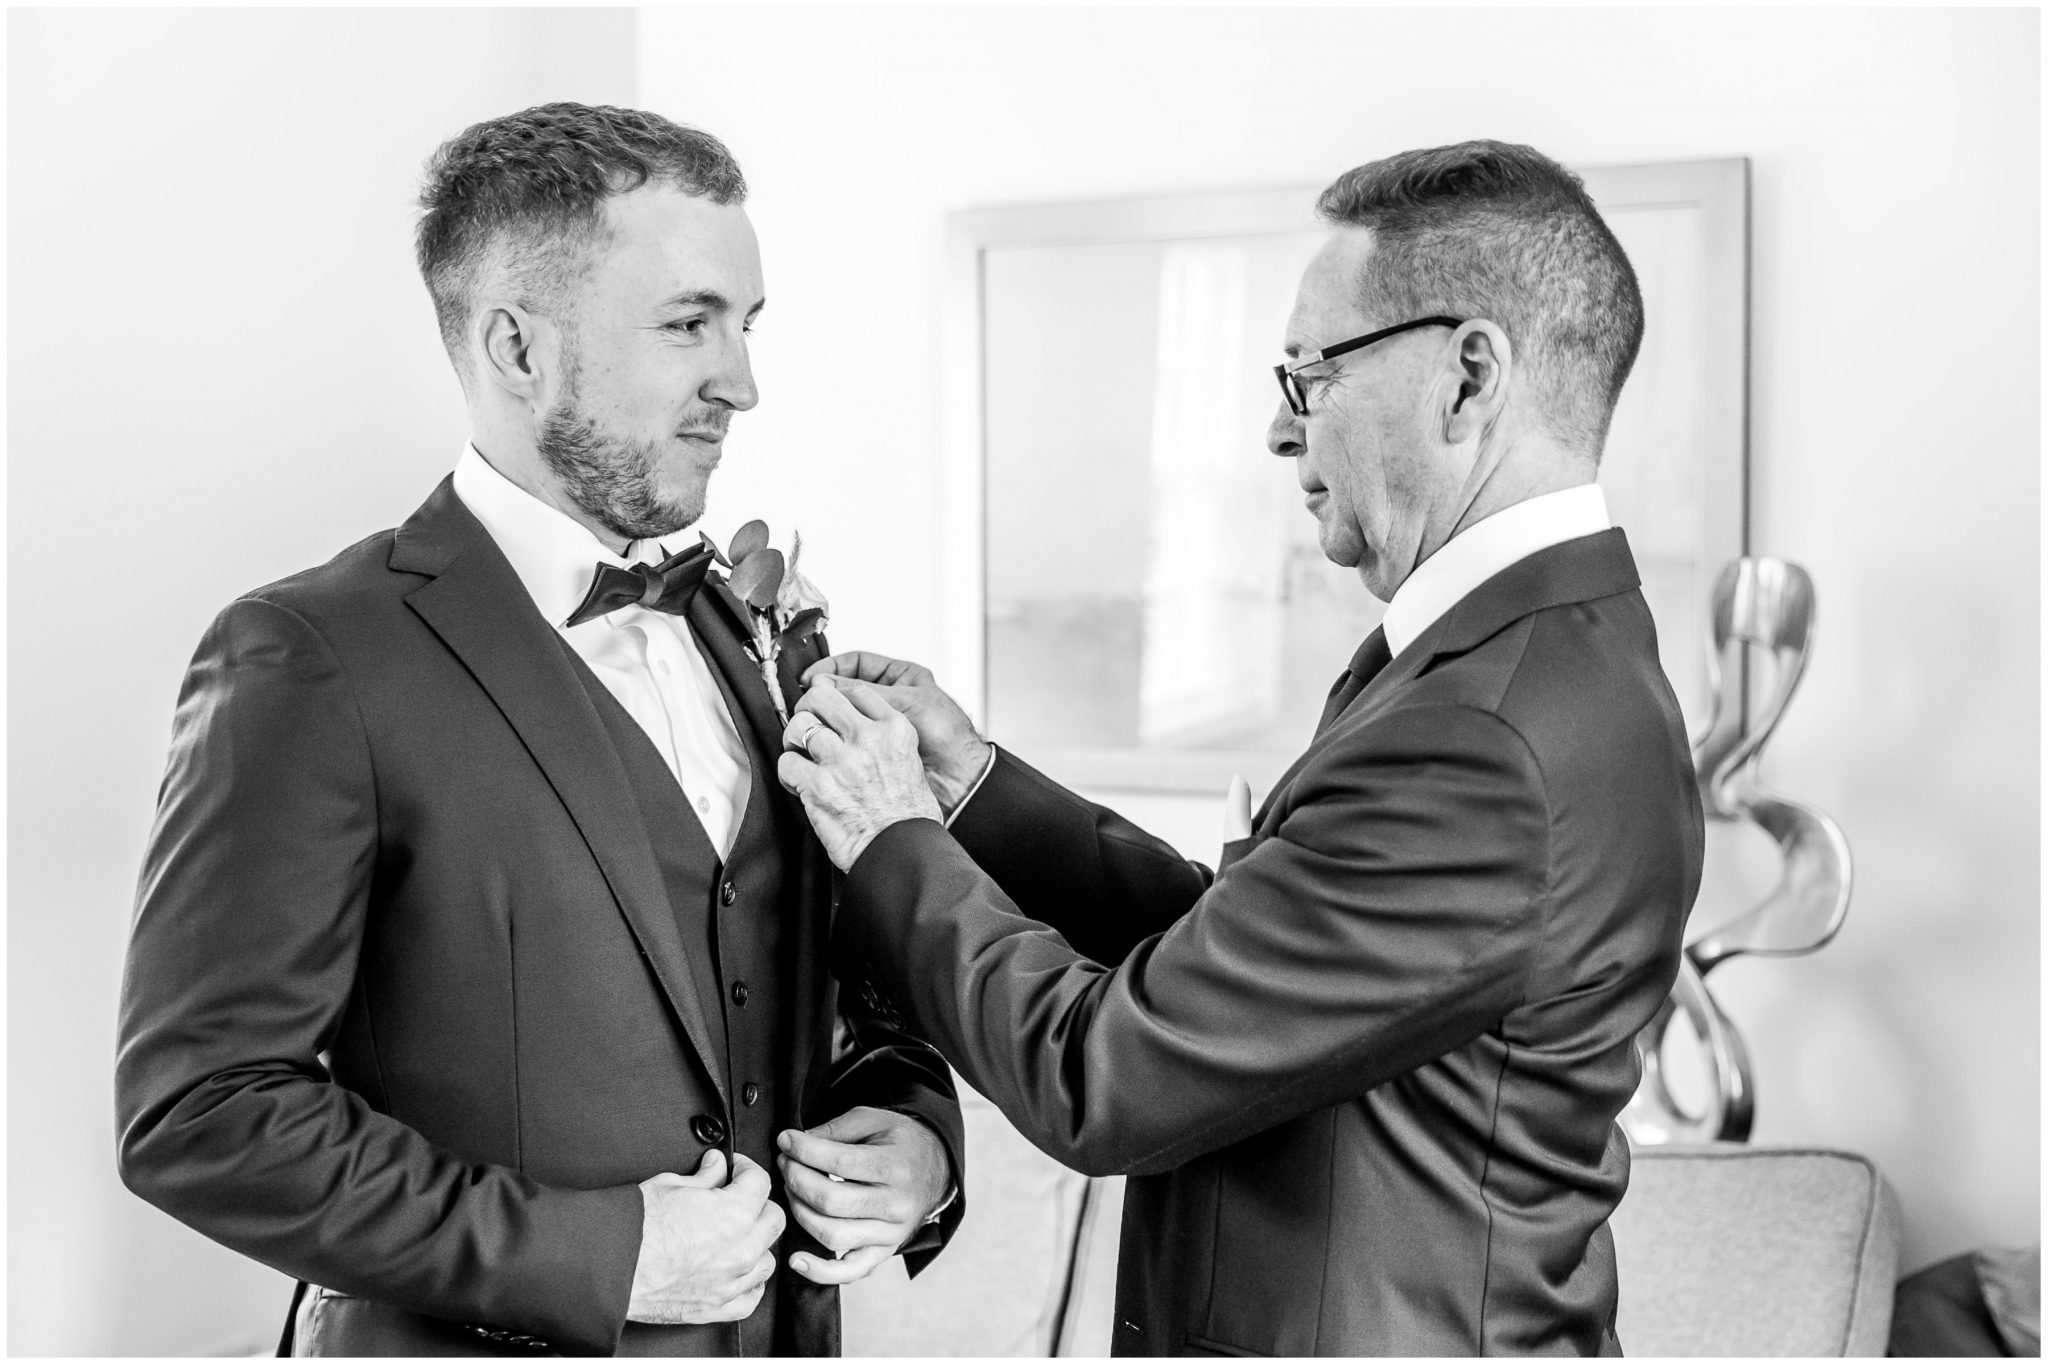 Father of the groom pins a buttonhole flower on his son's suit